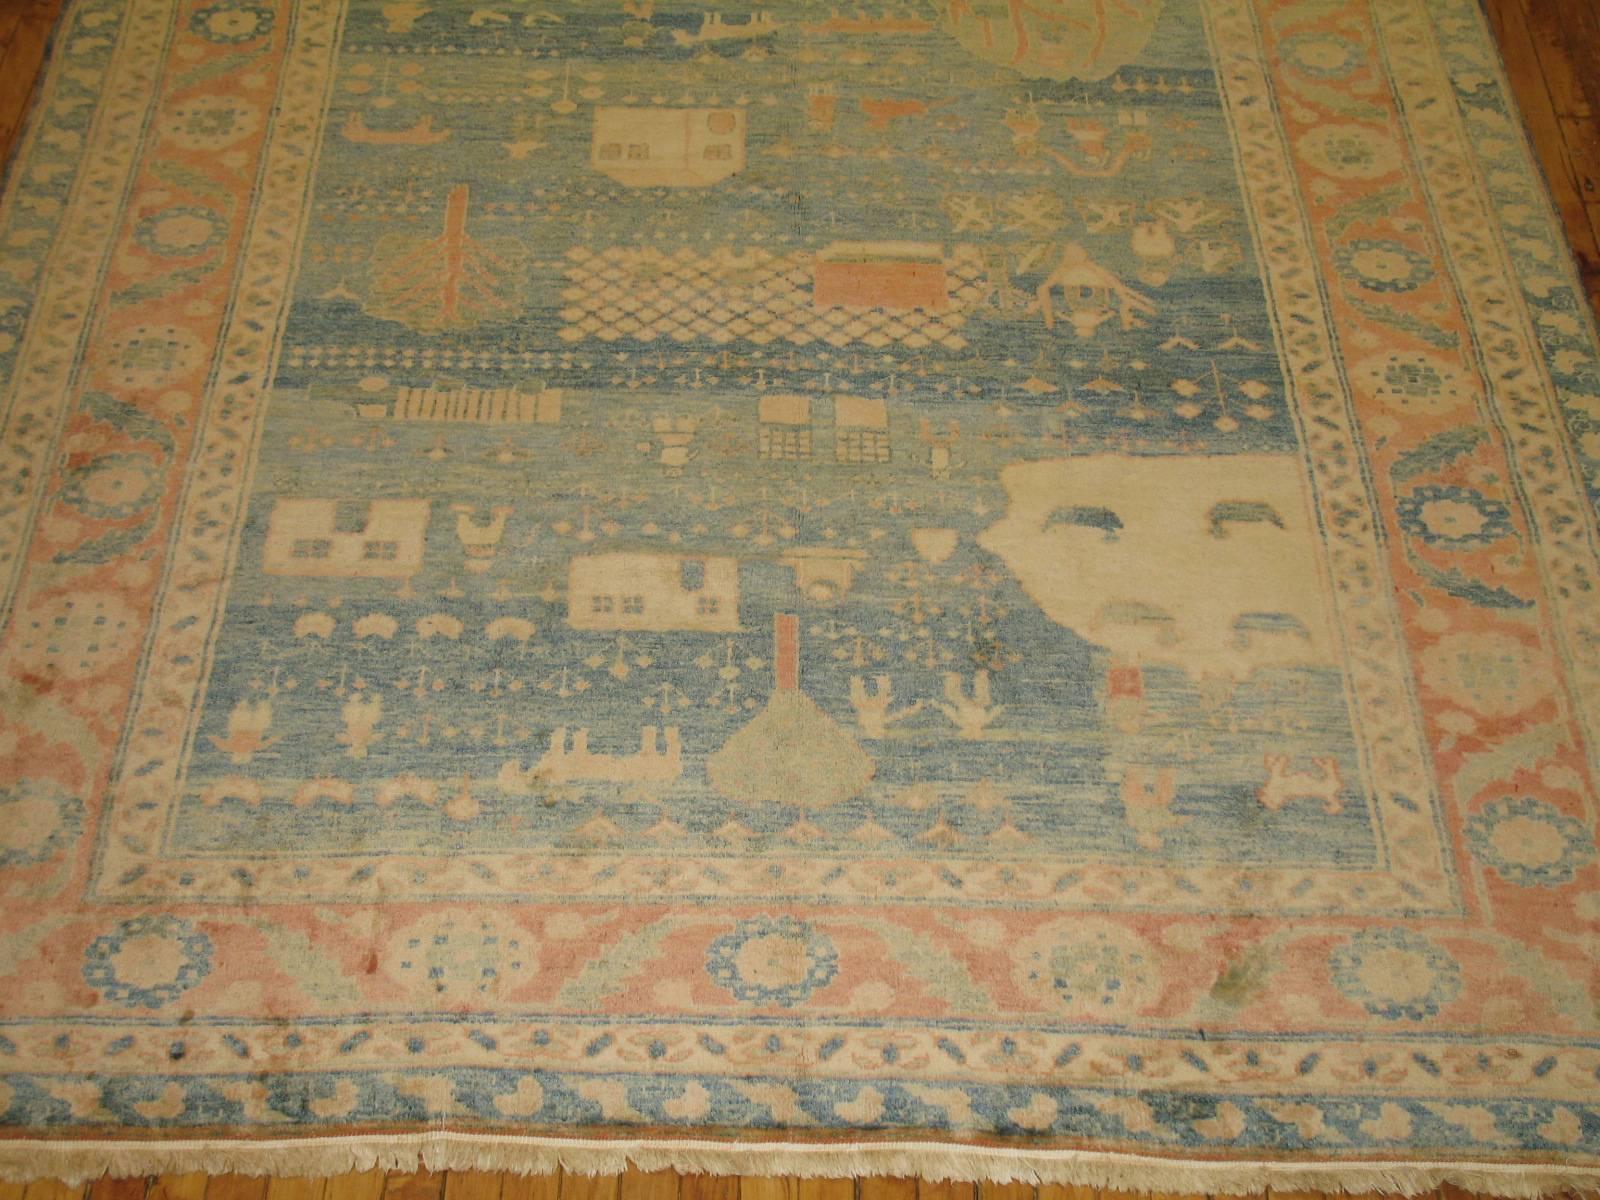 One of kind Turkish pictorial carpet with a soft blue background and peach border.